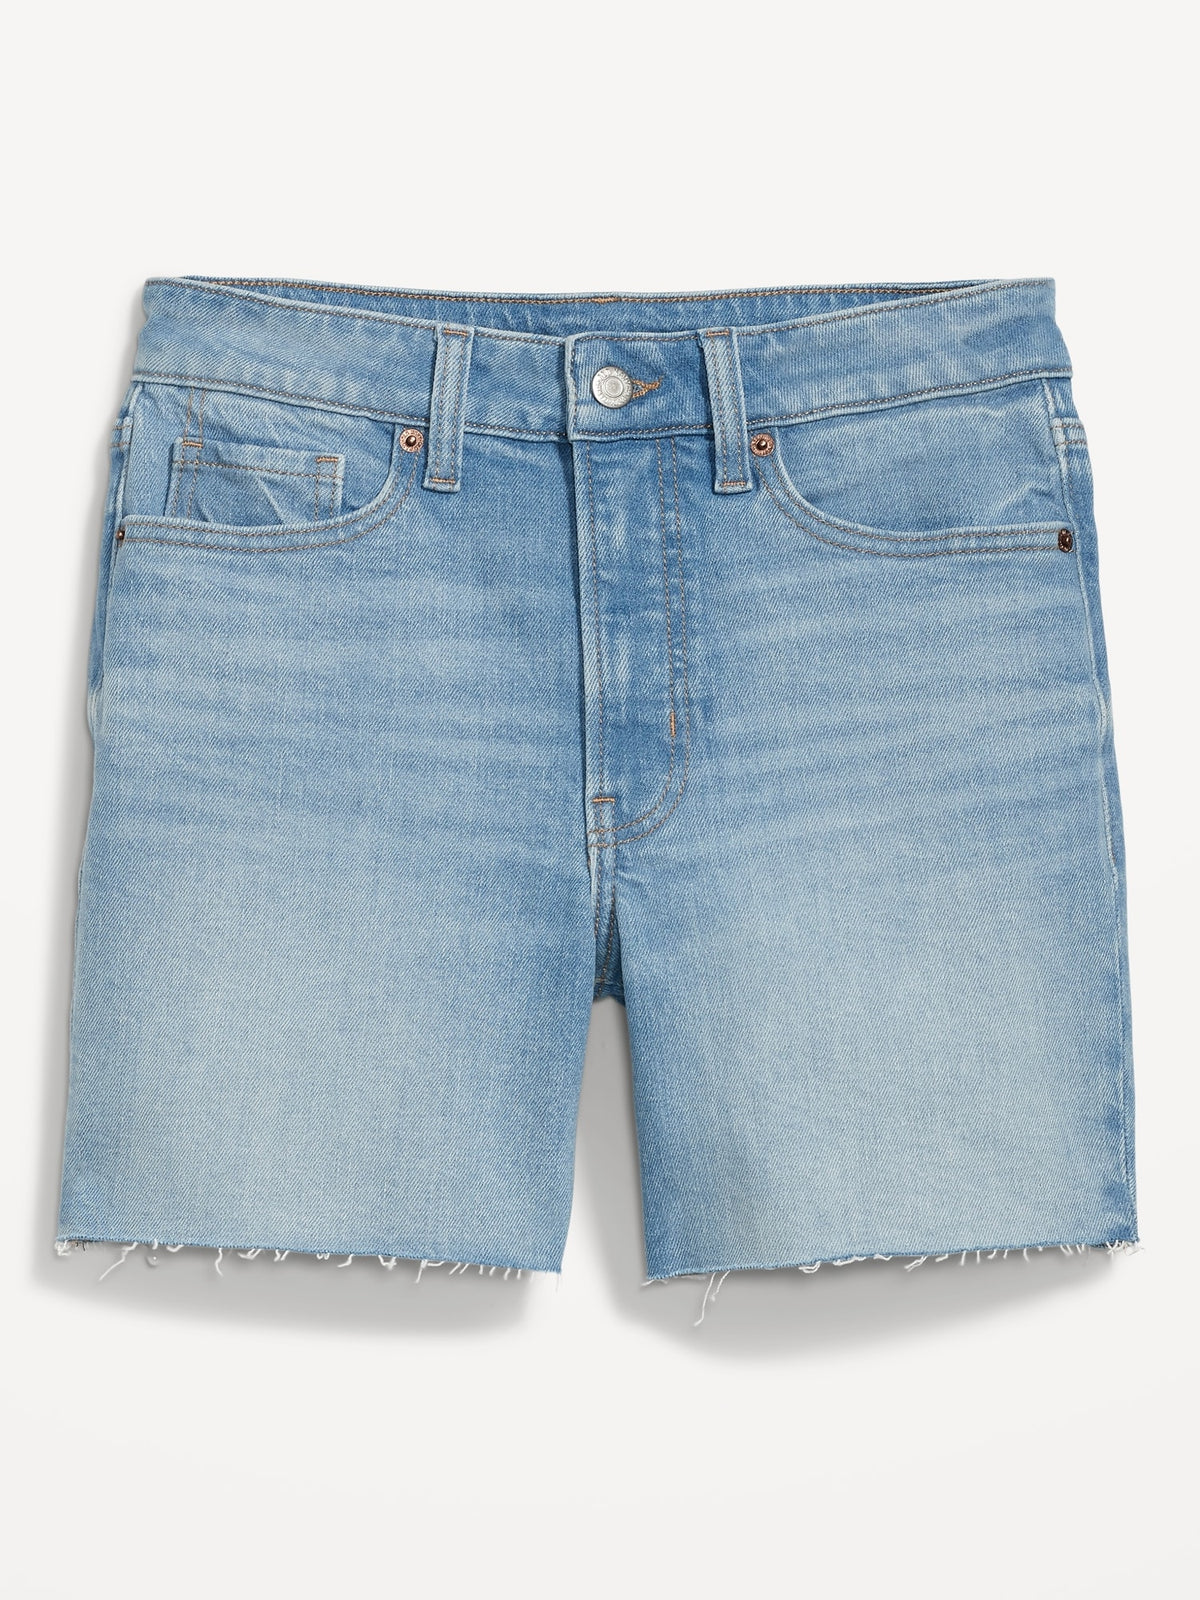 High-Waisted O.G. Straight Jean Shorts for Women -- 3-inch inseam